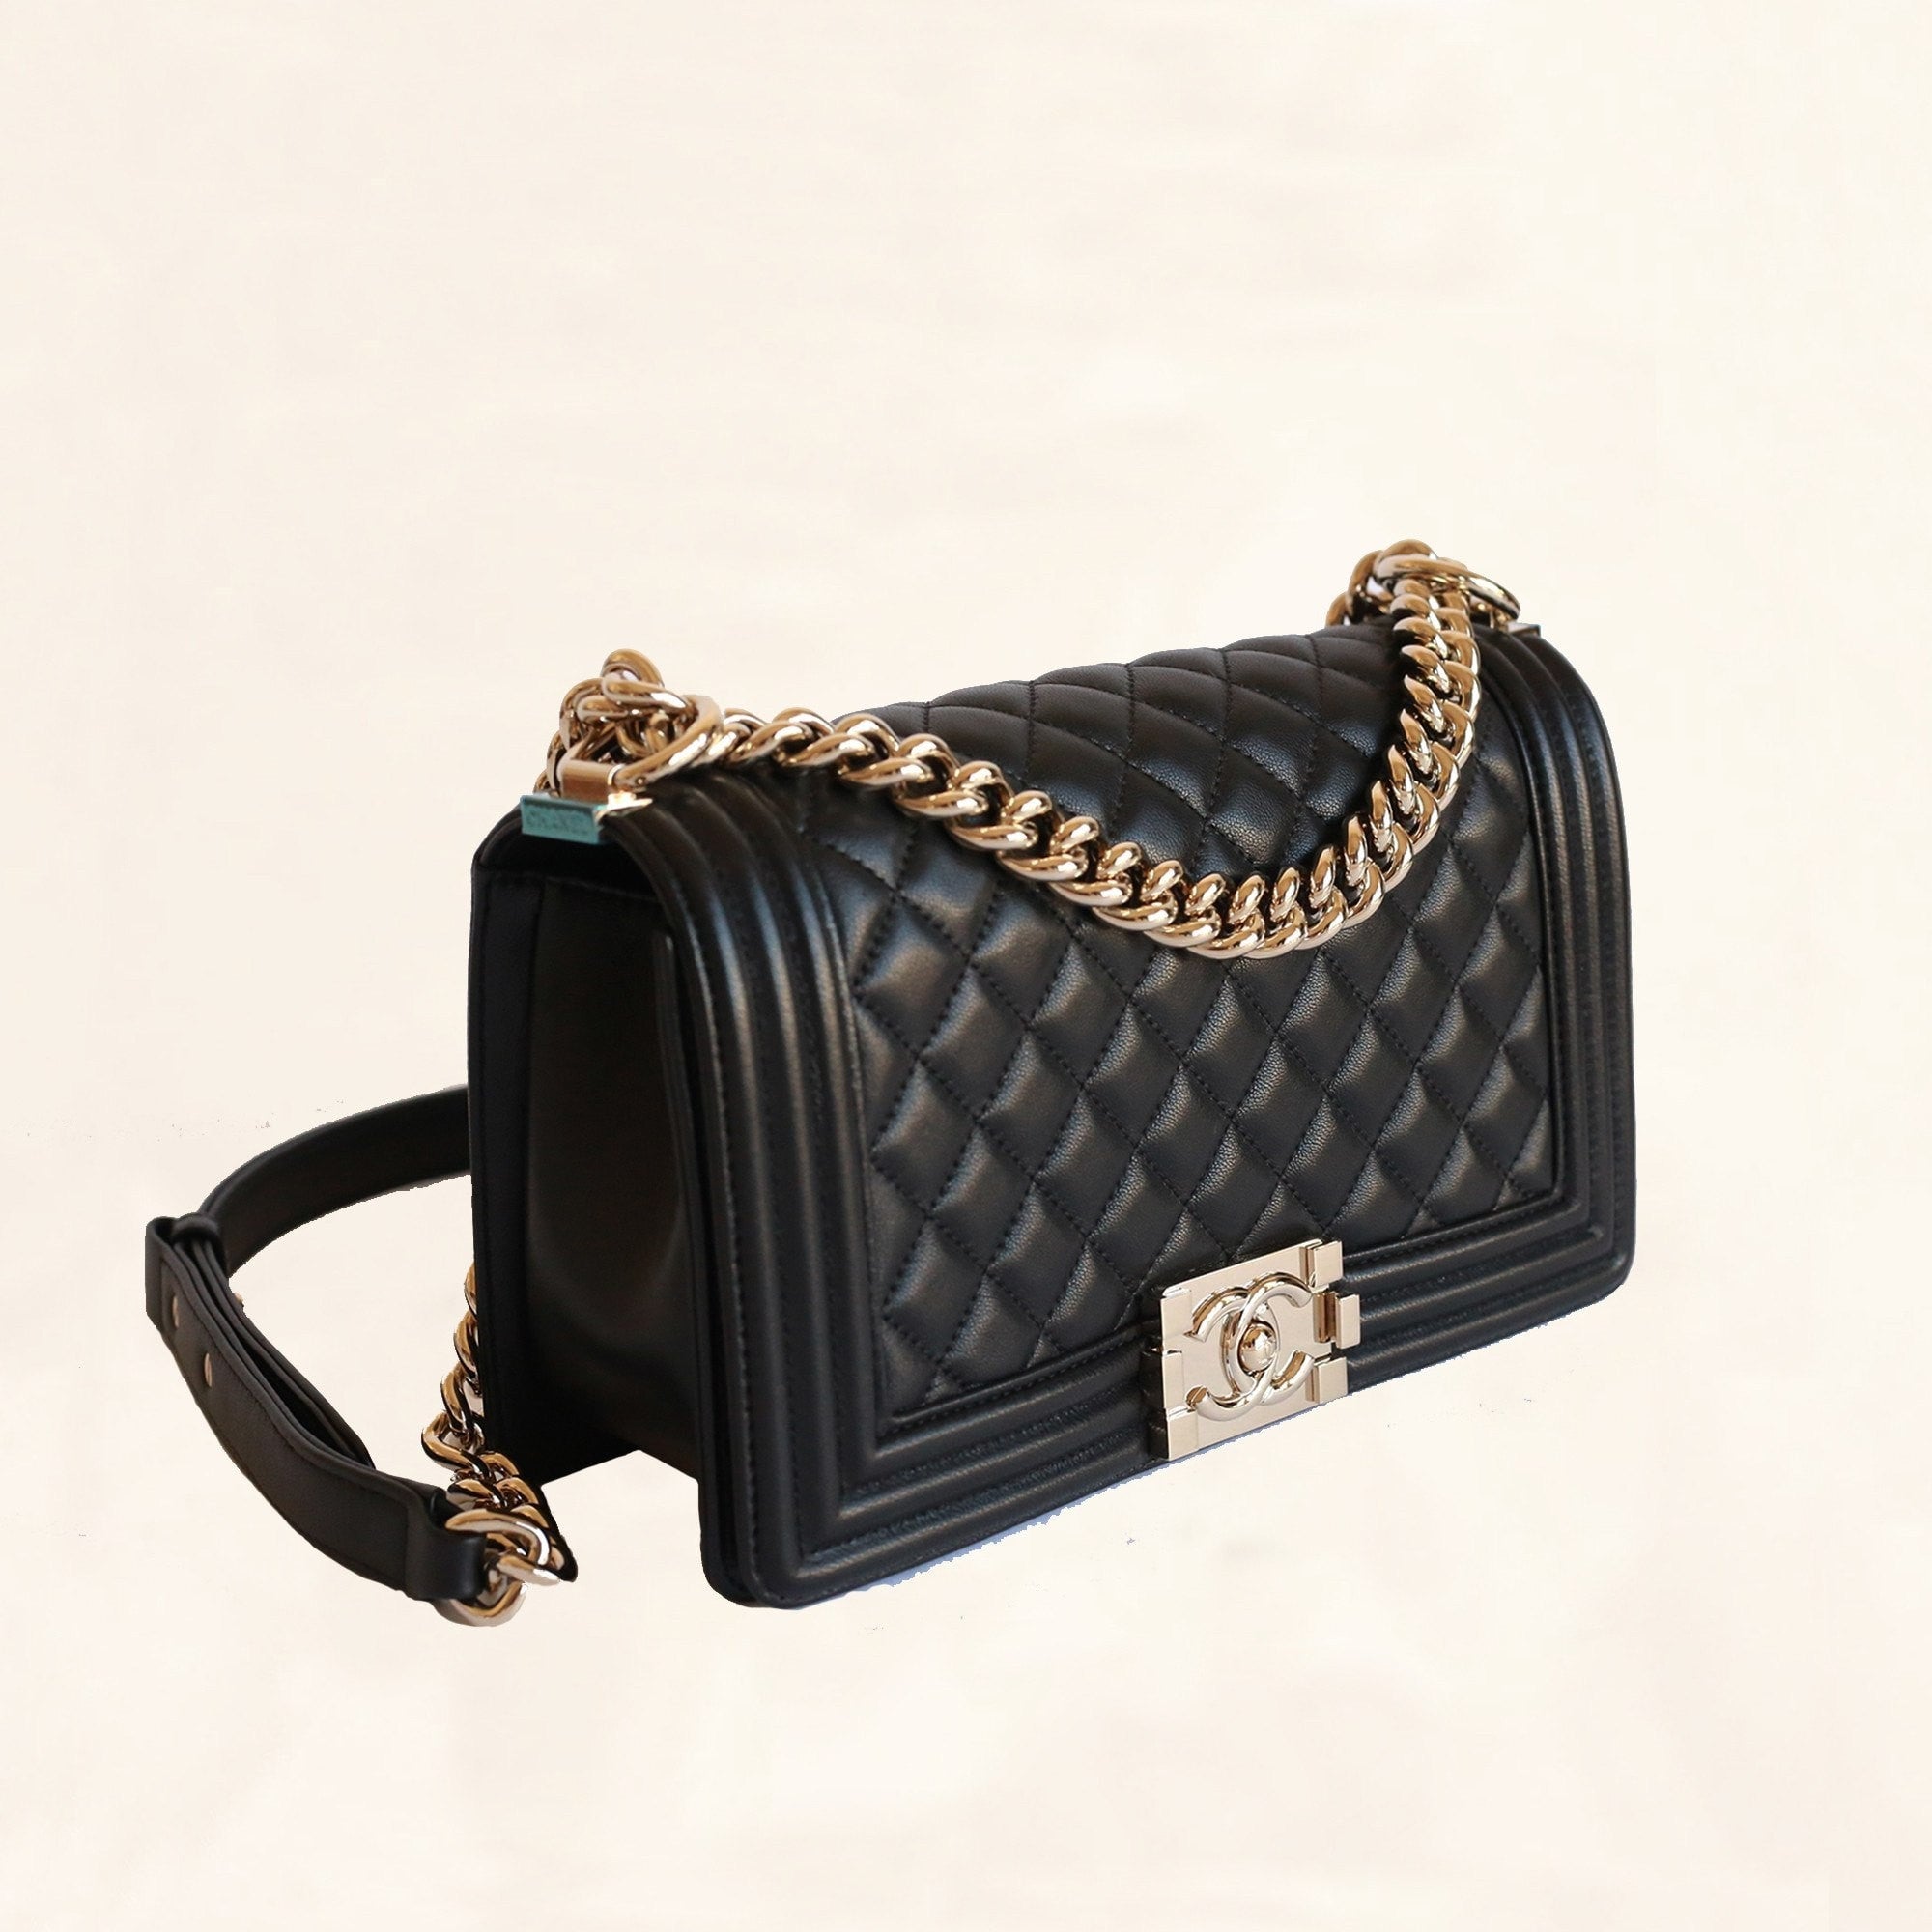 Chanel Black Pearly Quilted Lambskin Large Boy Bag